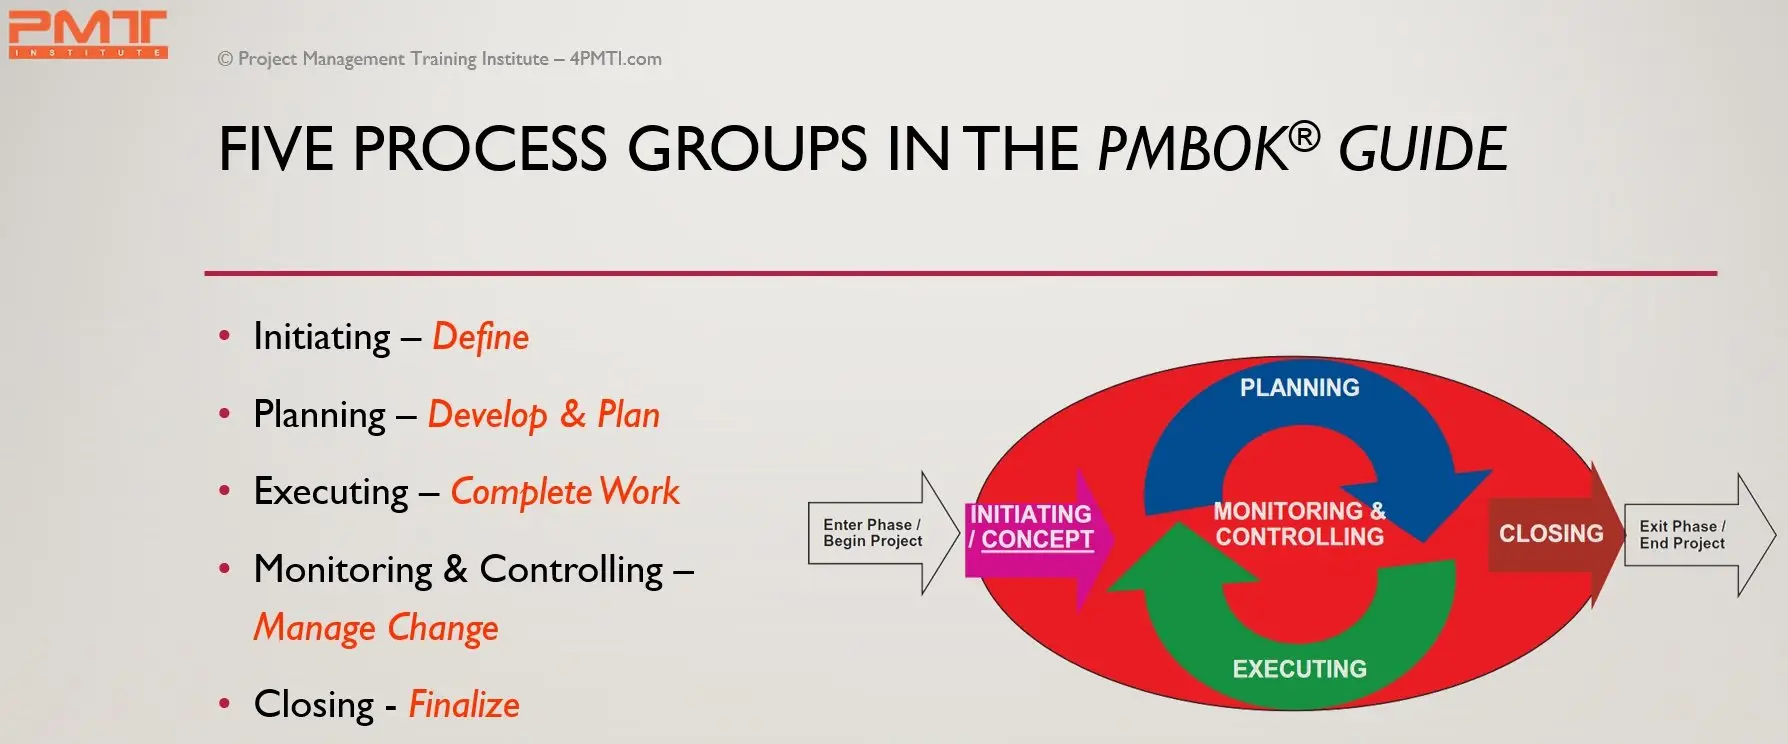 PMBOK Guide 5 Process Groups